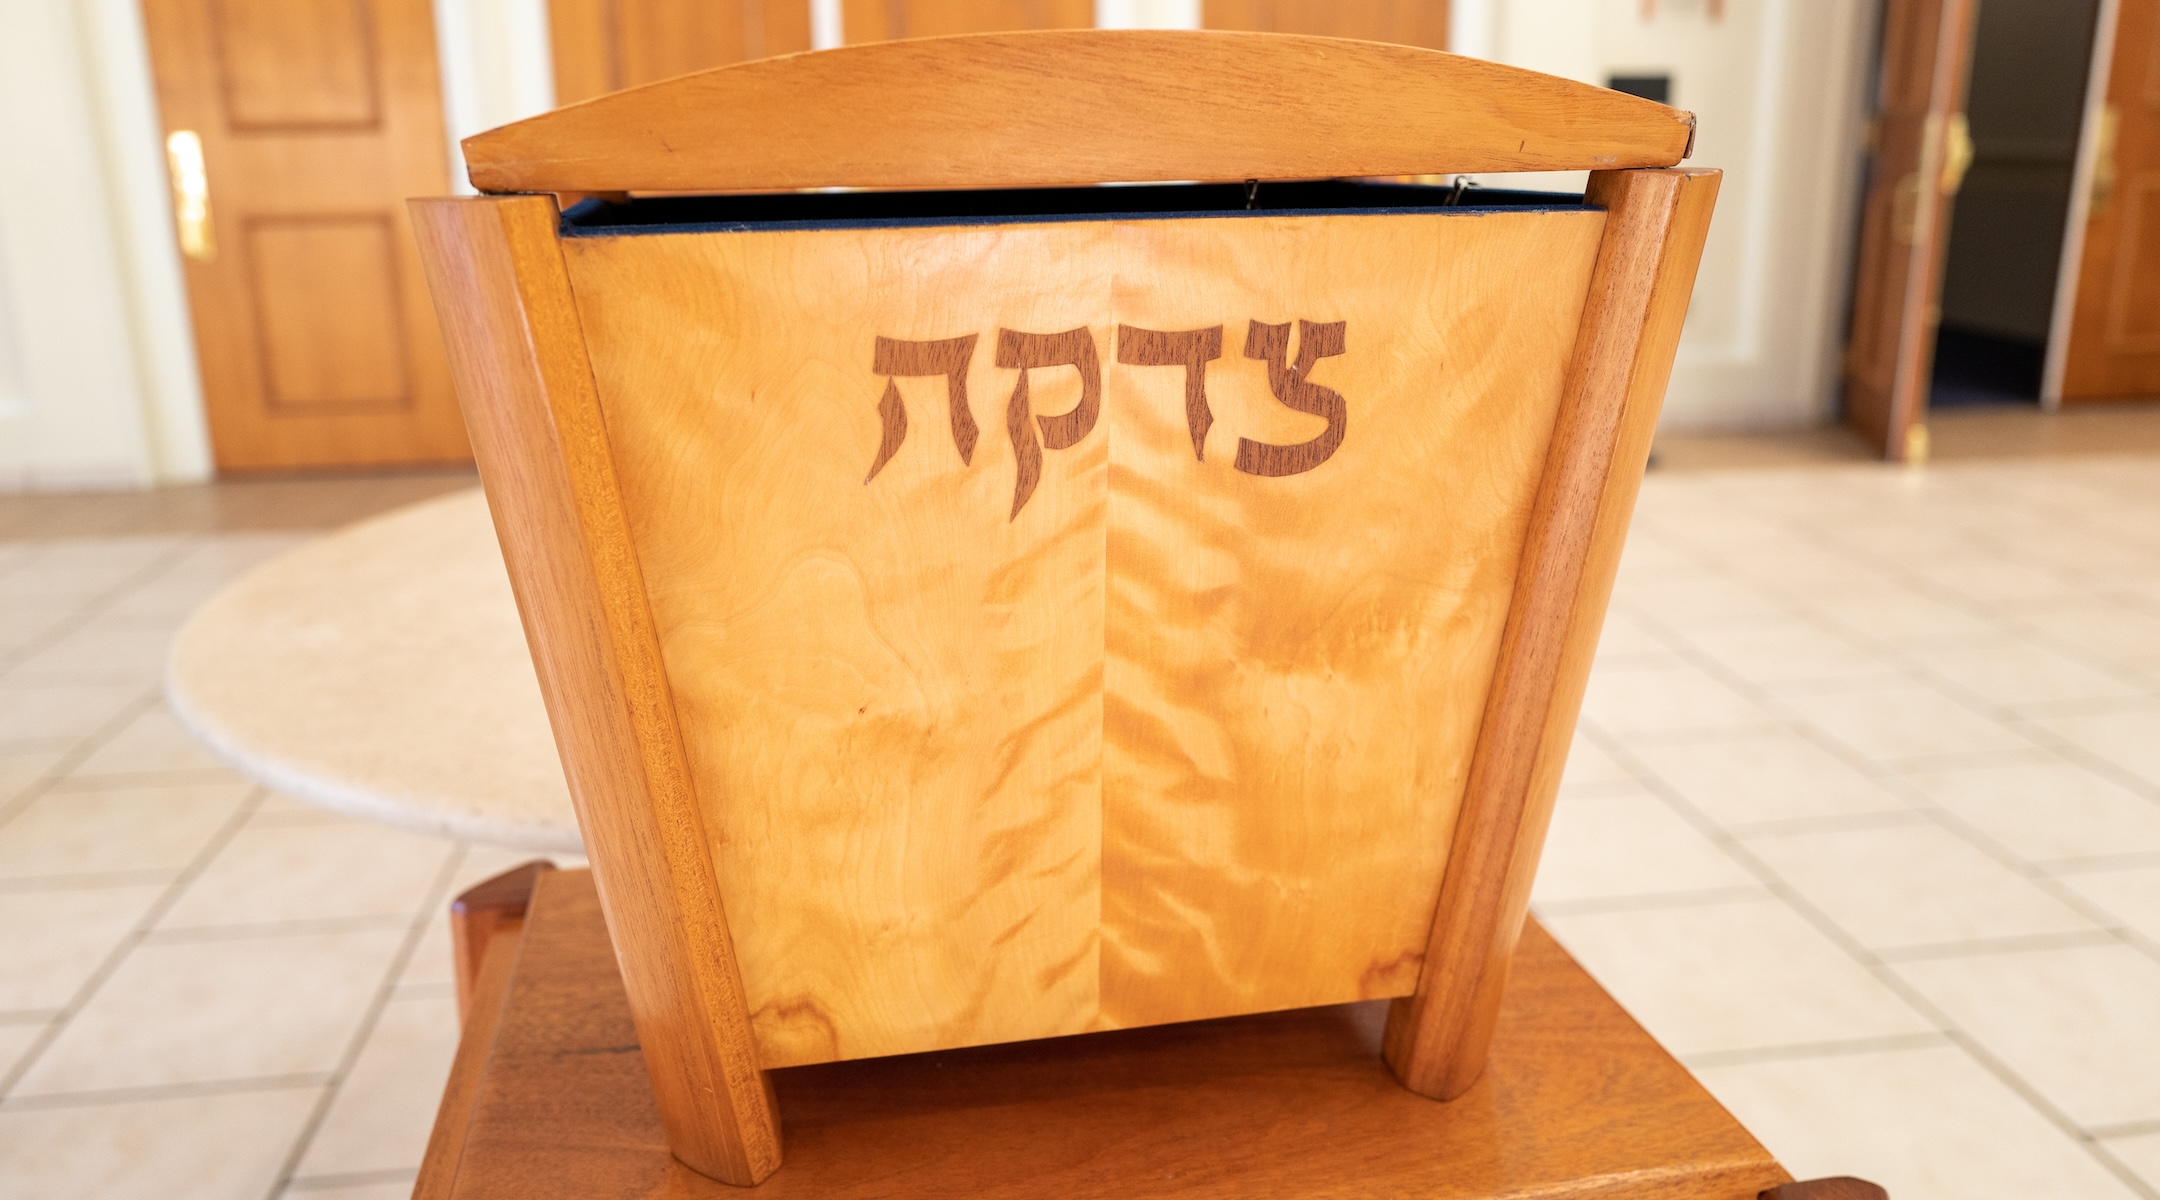 A tzedakah box for charitable giving in the foyer of a synagogue in Lafayette, California, Jan. 20, 2022. (Smith Collection/Gado/Getty Images)